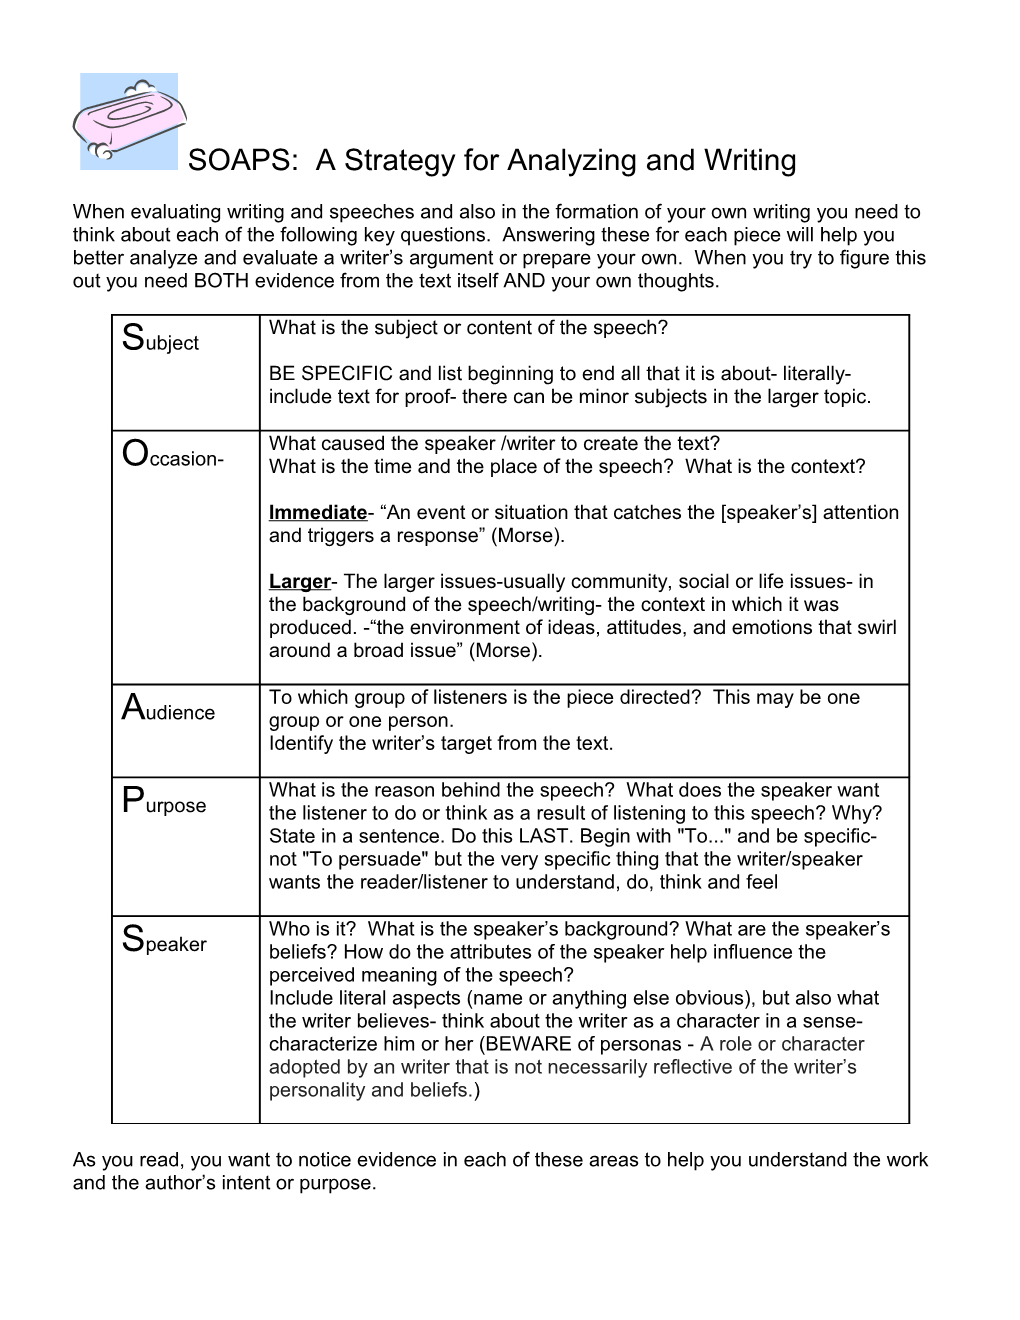 SOAPS Help*: a Strategy for Analyzing and Writing